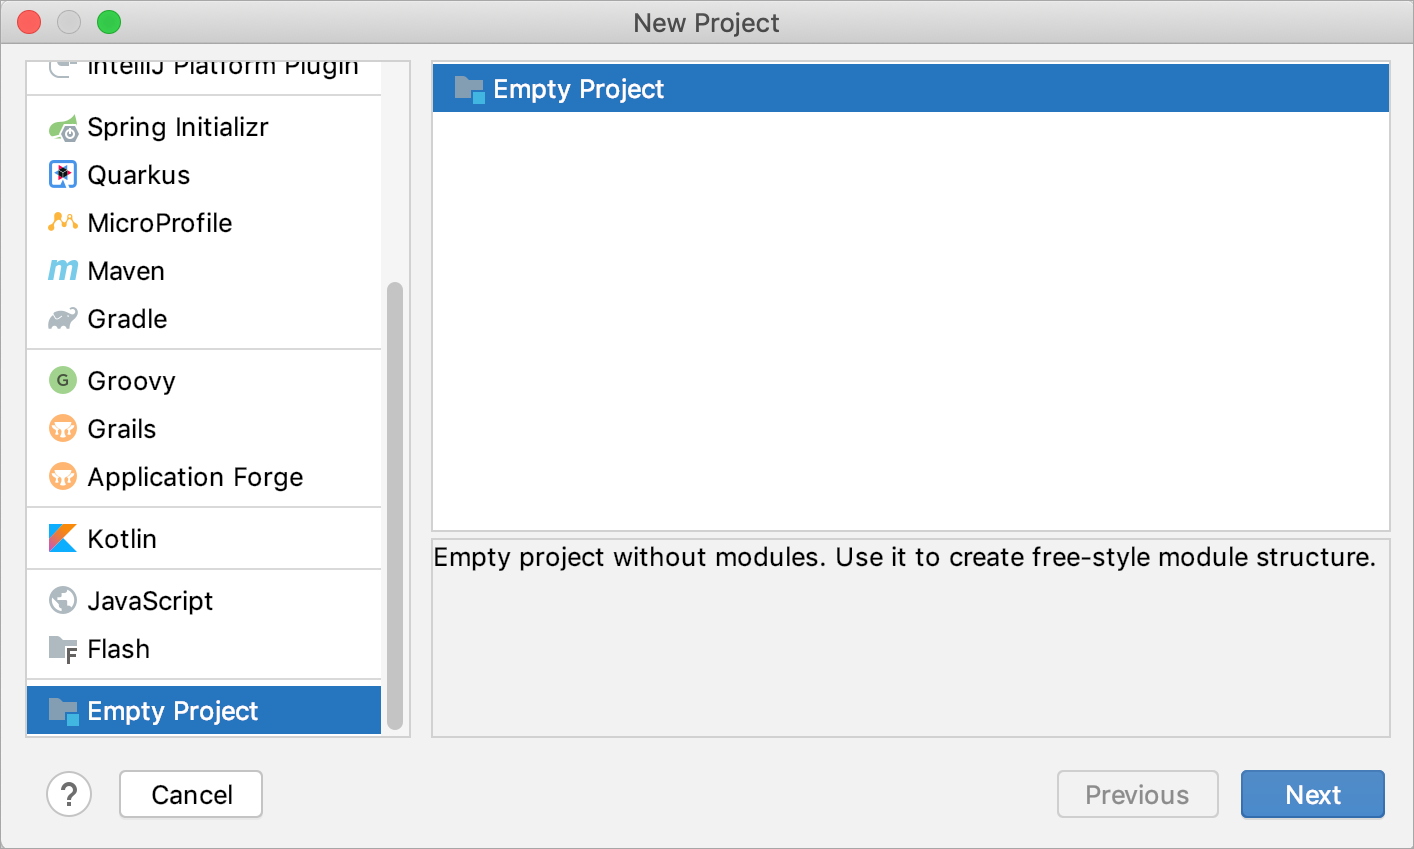 Creating a new empty project